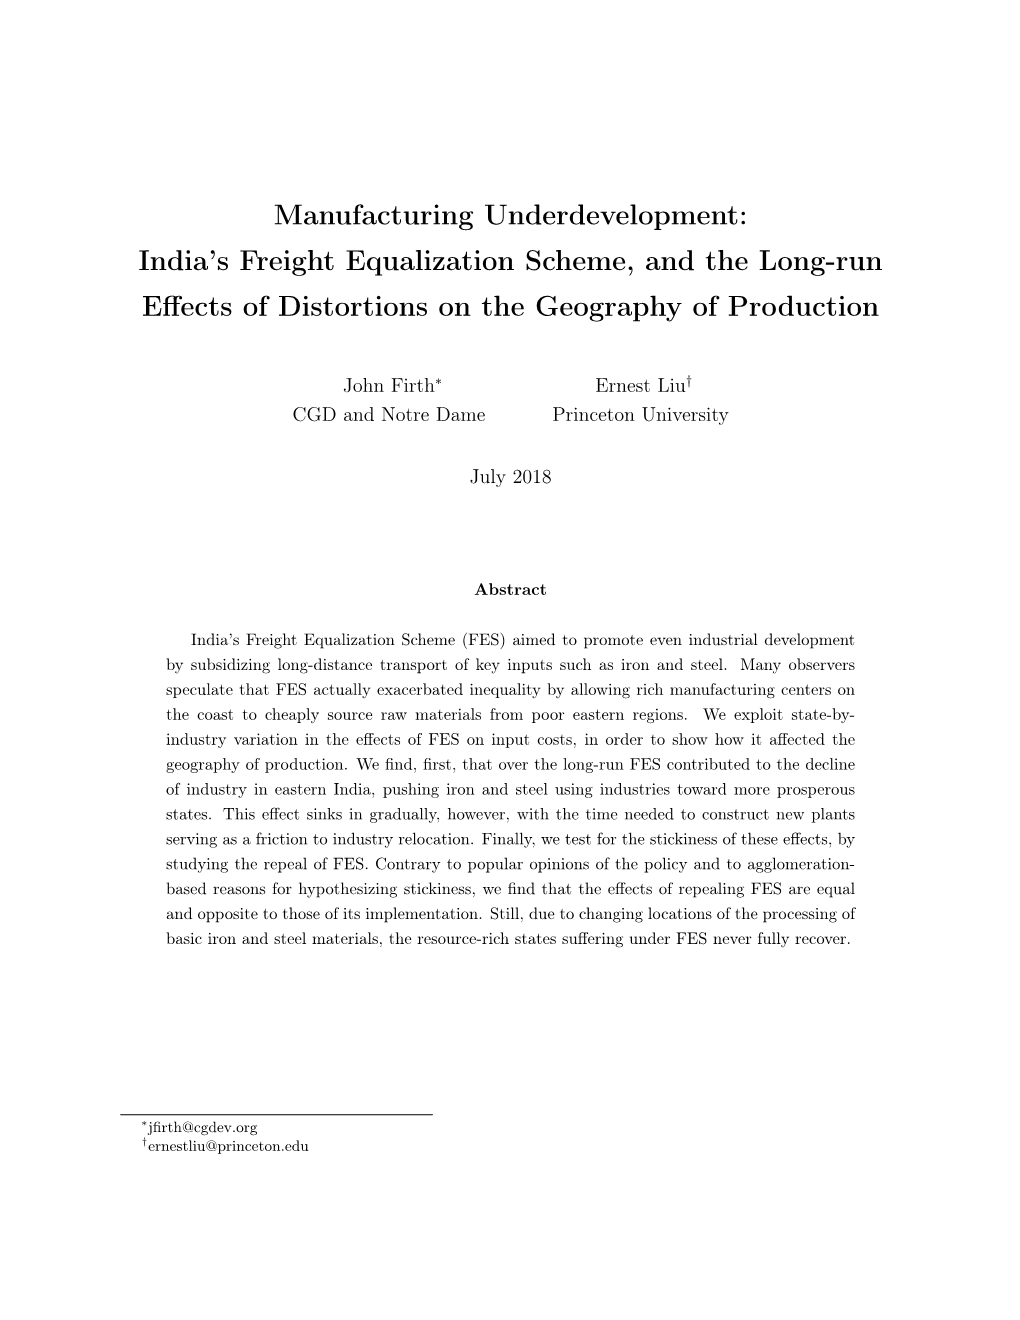 India's Freight Equalization Scheme, and the Long-Run Effects Of